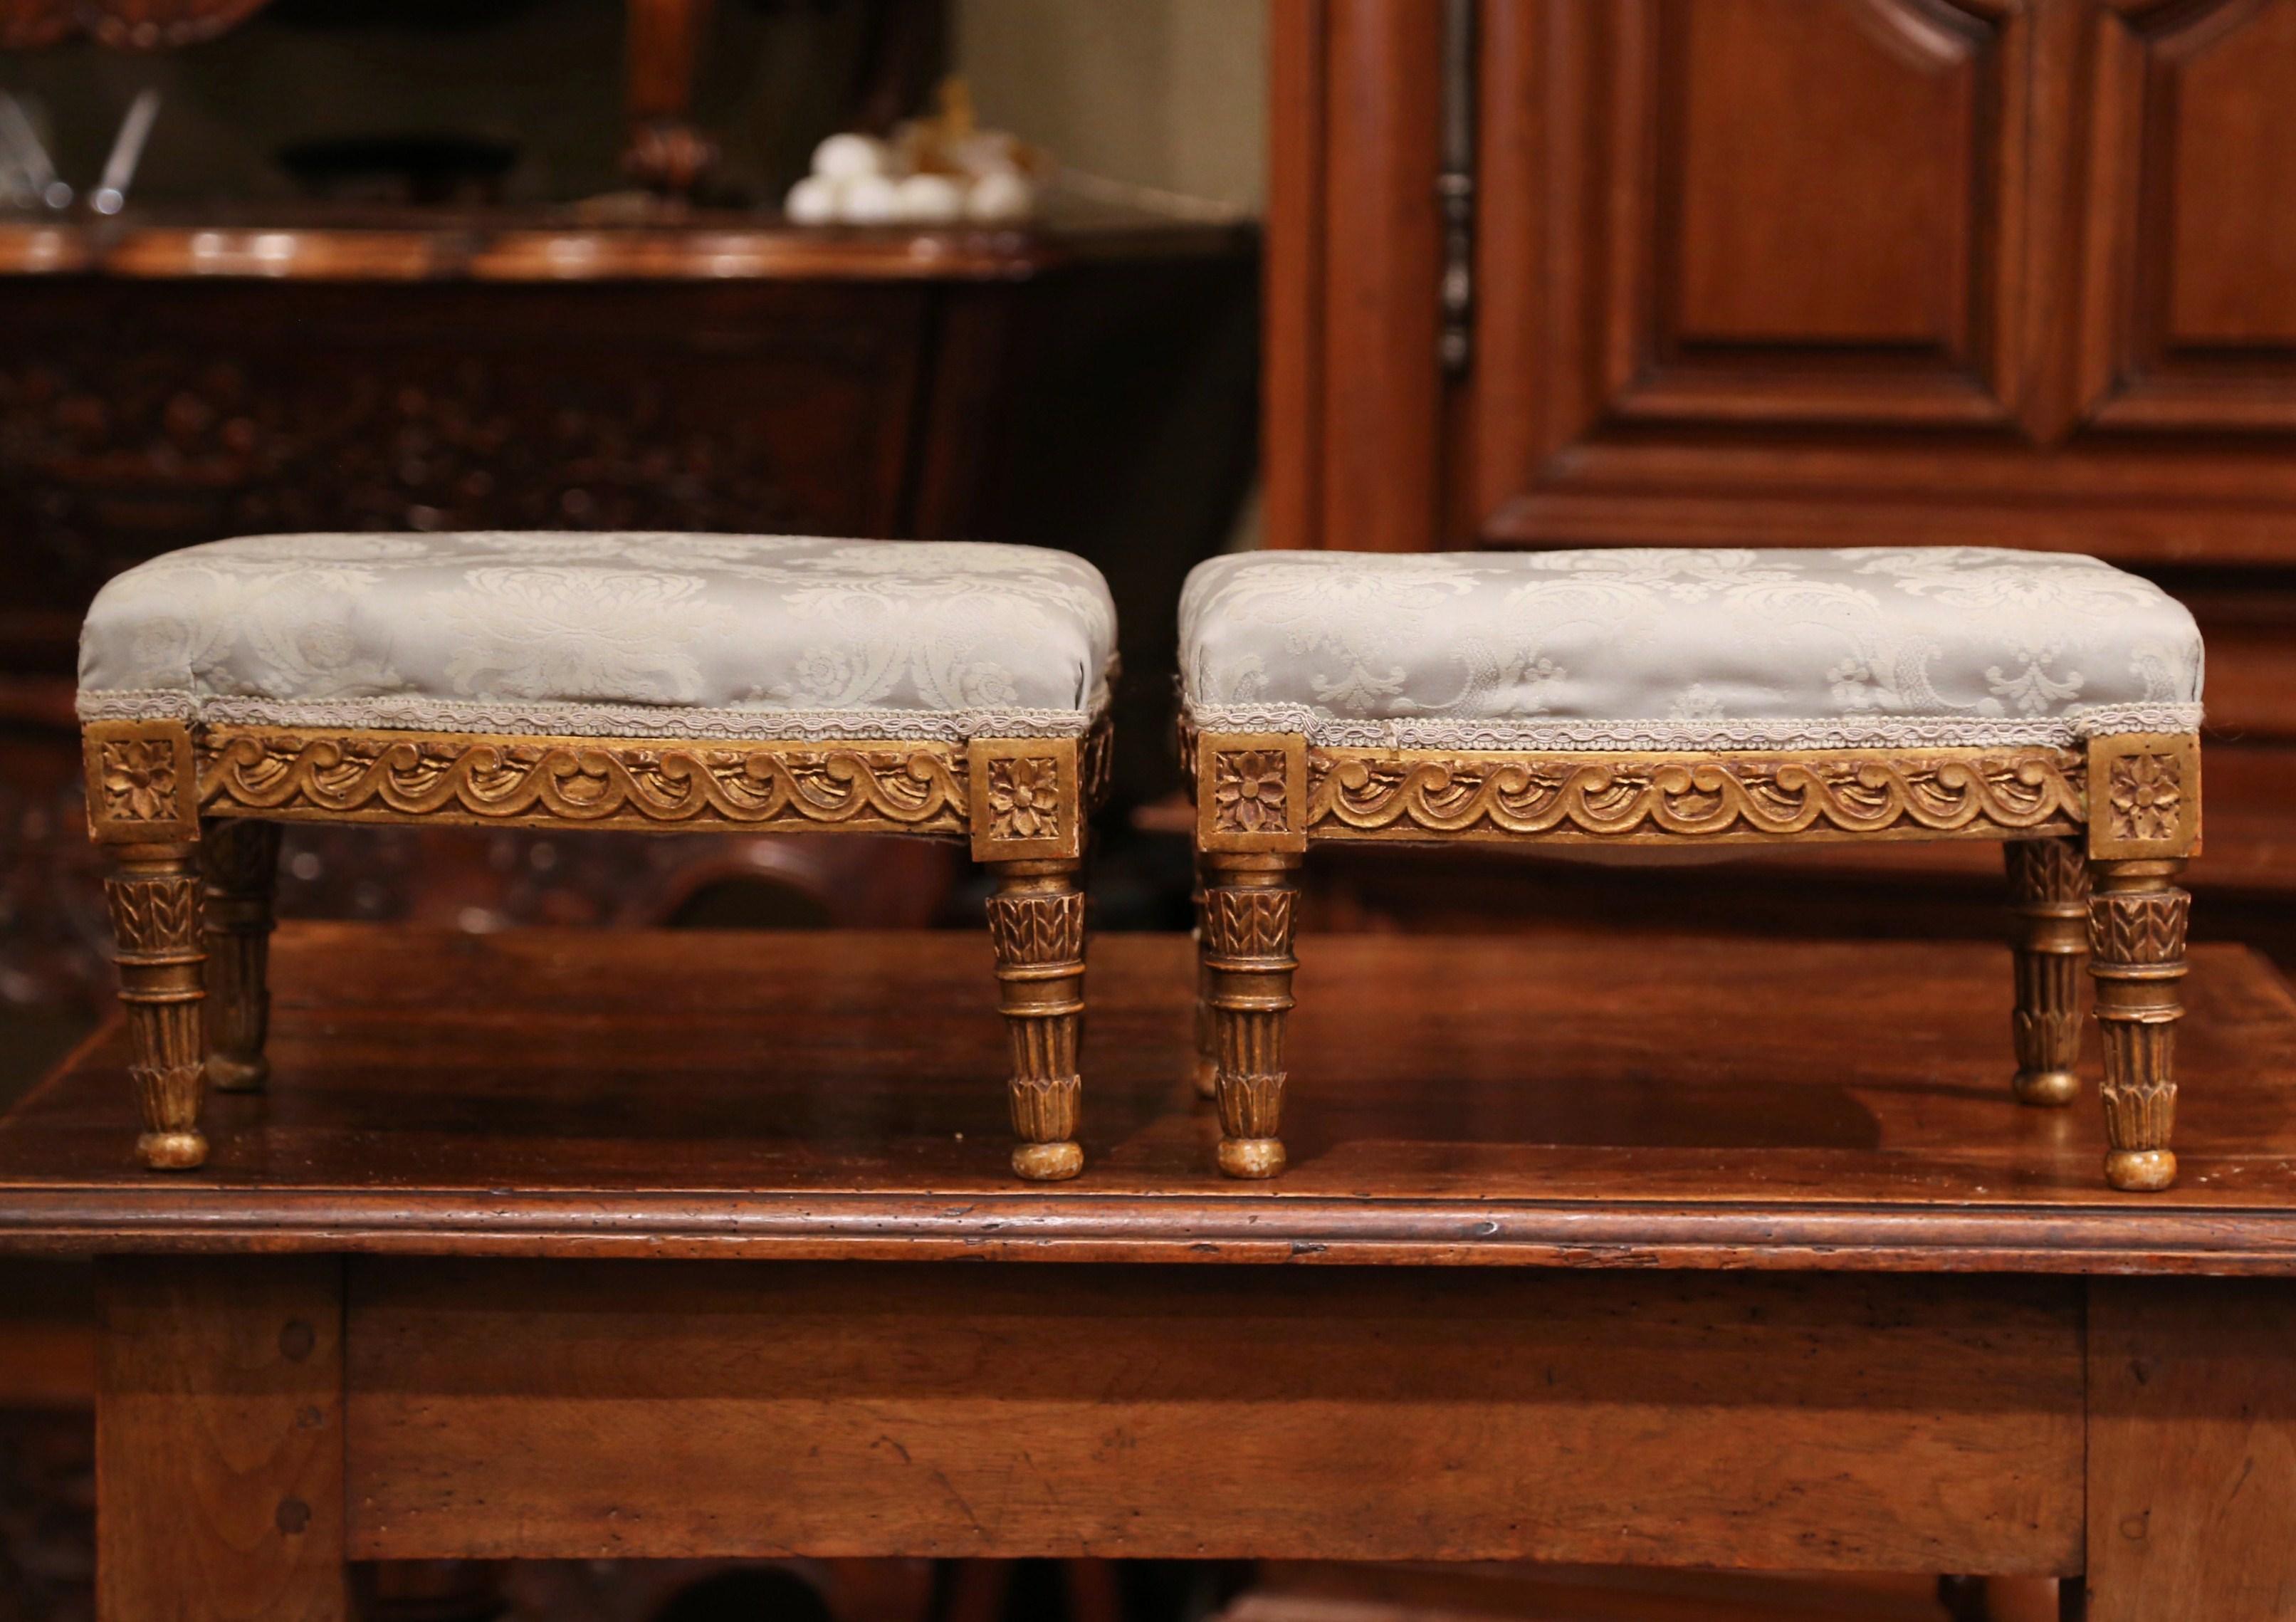 Place these elegant antique footstools near your armchairs for extra leg support. Crafted in France, circa 1880, each stool sits on four small turned legs and features bombe sides decorated with hand carved geometric motifs. In each corner, you'll